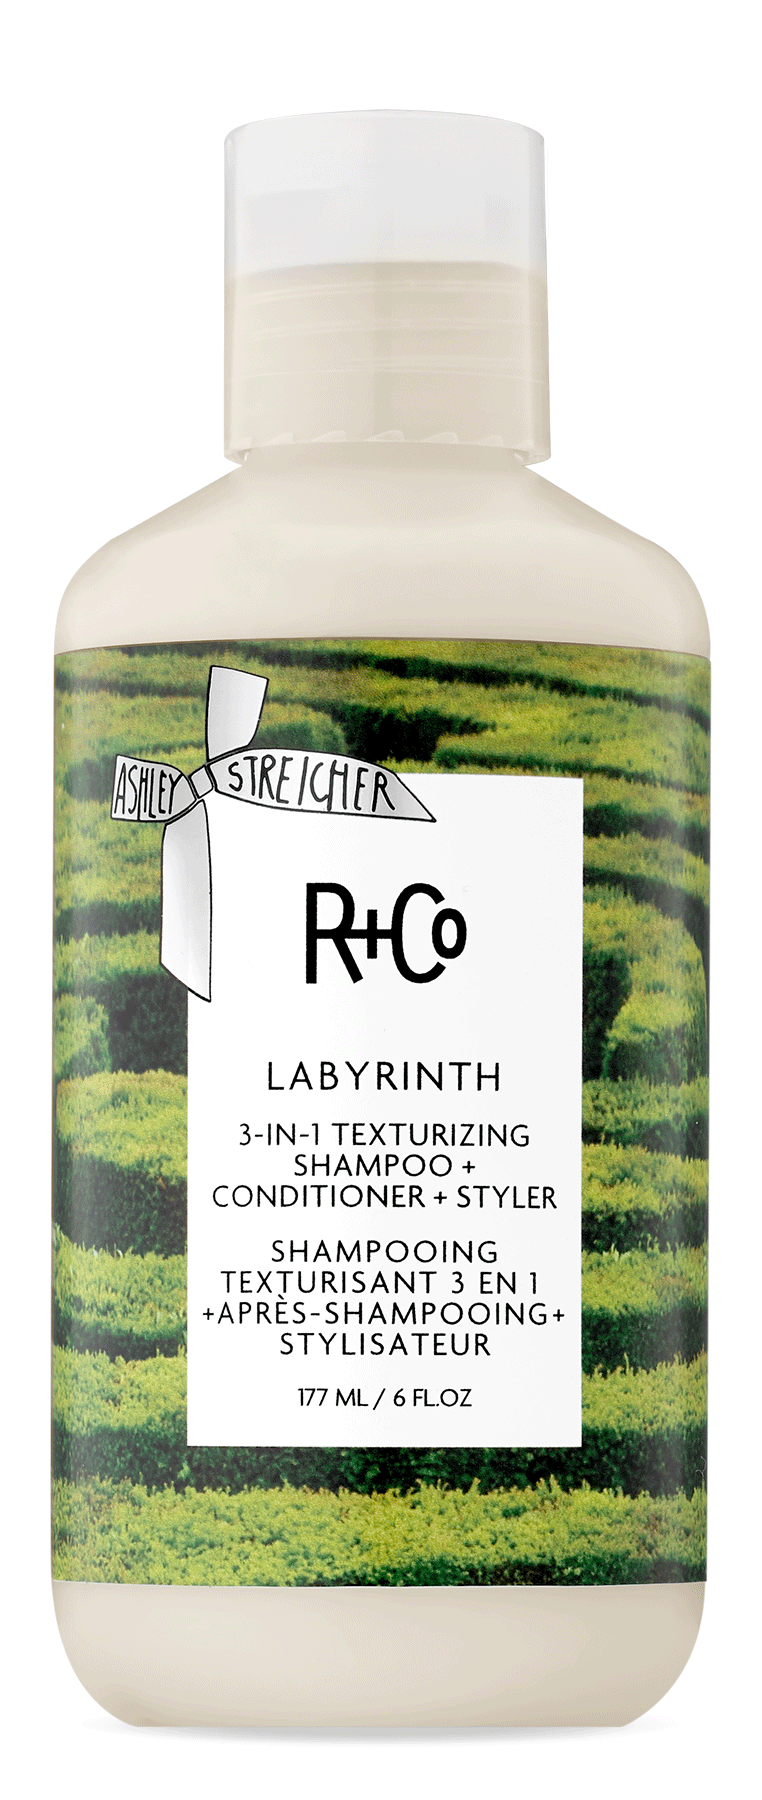 R+CO-Labyrinth 3-In-1 Texturizing Shampoo + Conditioner + Styler 177ml